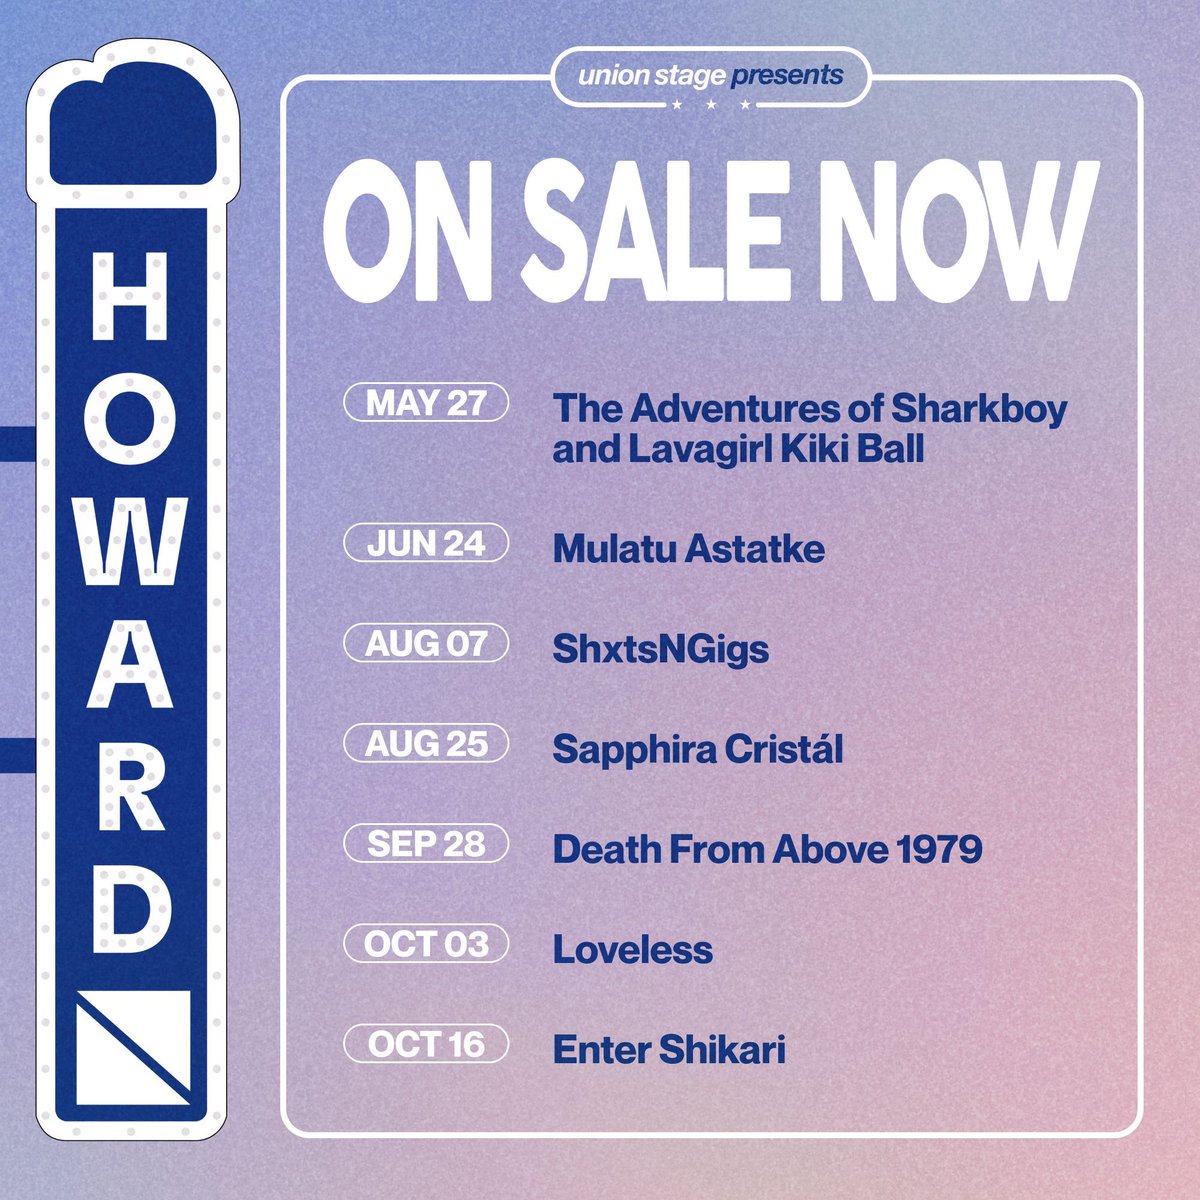 On Sale Now! 5.27 — The Adventures of Sharkboy and Lavagirl Kiki Ball 6.24 — Mulatu Astatke 8.07 — ShxtsNGigs 8.25 — Sapphira Cristál 9.28 — Death From Above 1979 10.3 — Loveless 10.16 — Enter Shikari Tickets available at the link in bio.